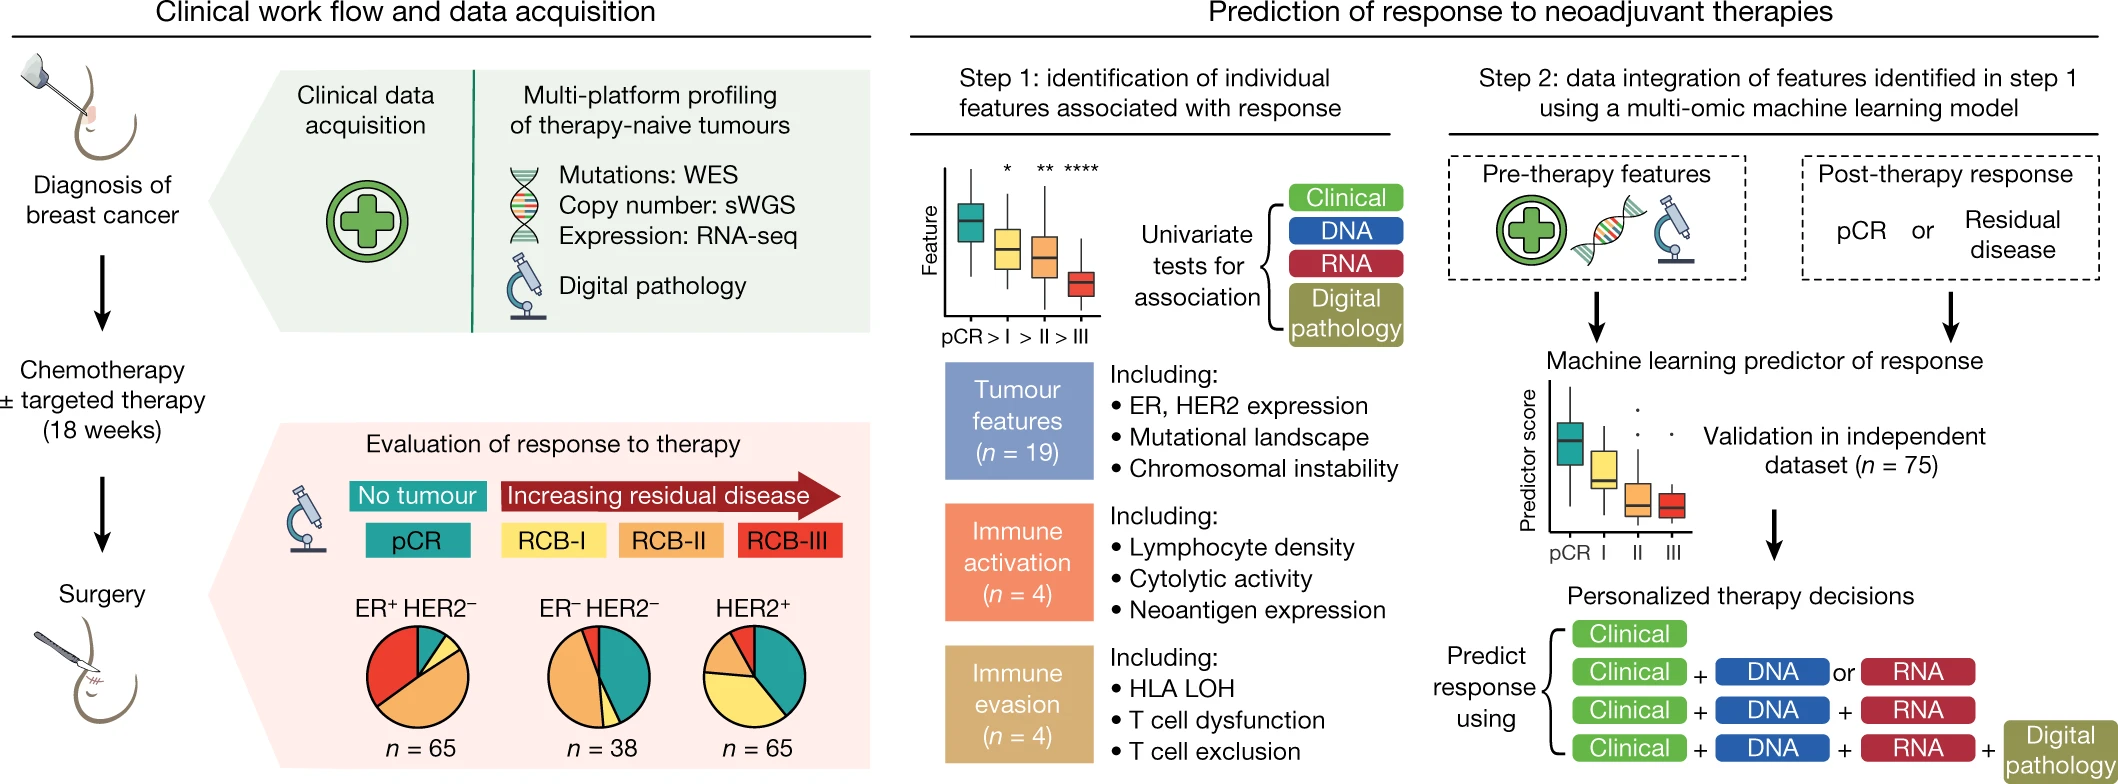 Figure explaining how we could predict the response to therapy using multi-platform profiling of therapy-naïve tumours and machine learning.